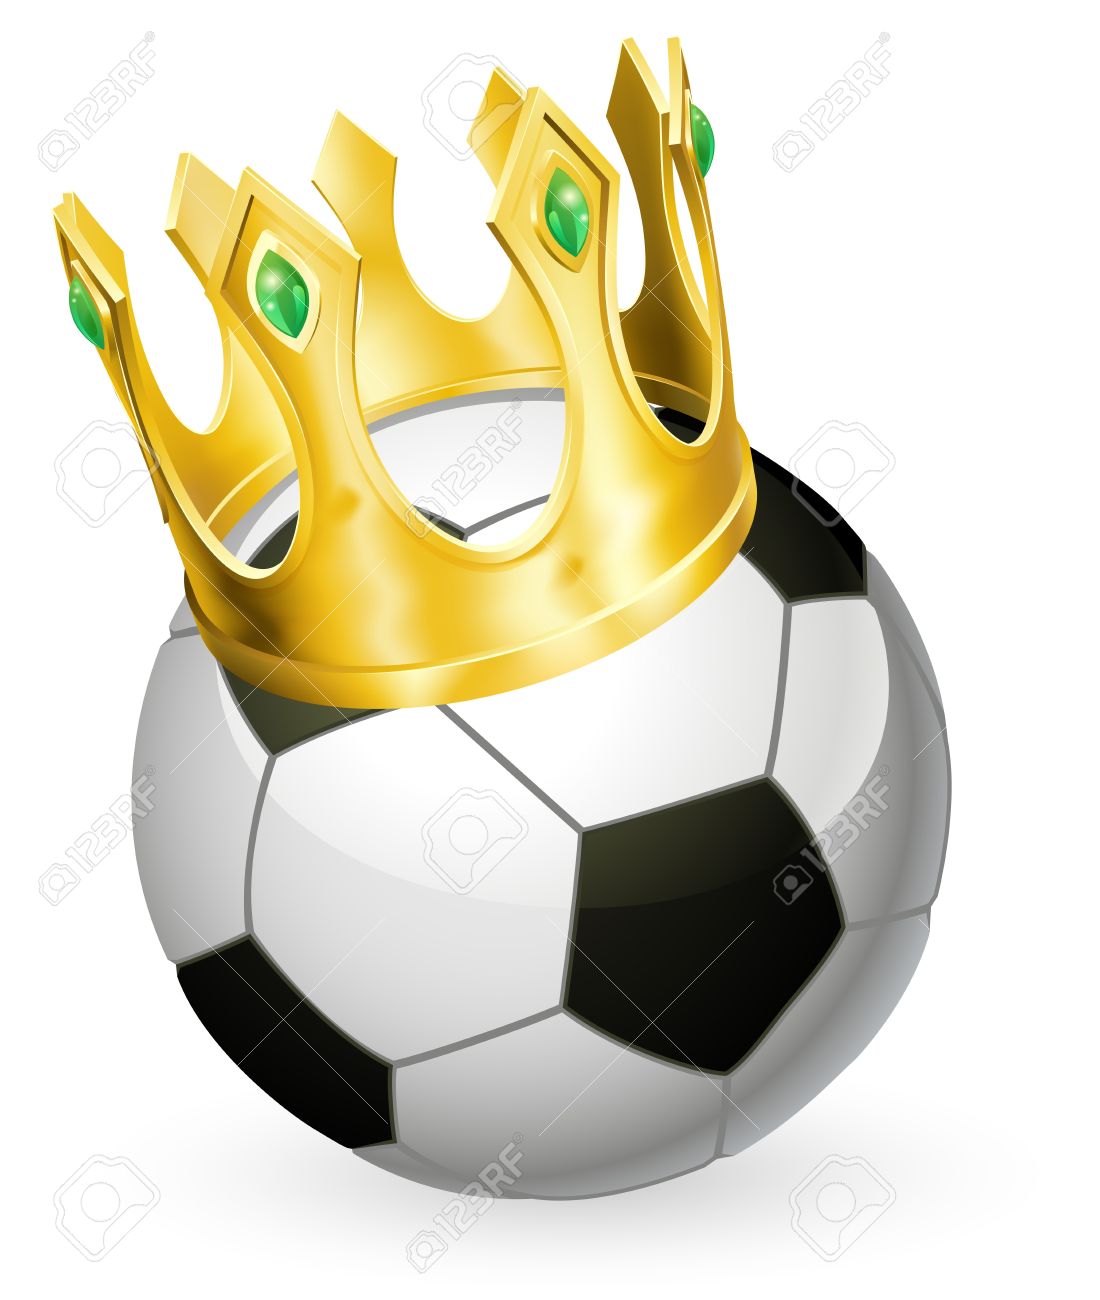 14366718-king-of-soccer-concept-a-football-soccer-ball-wearing-a-gold-crown.jpg